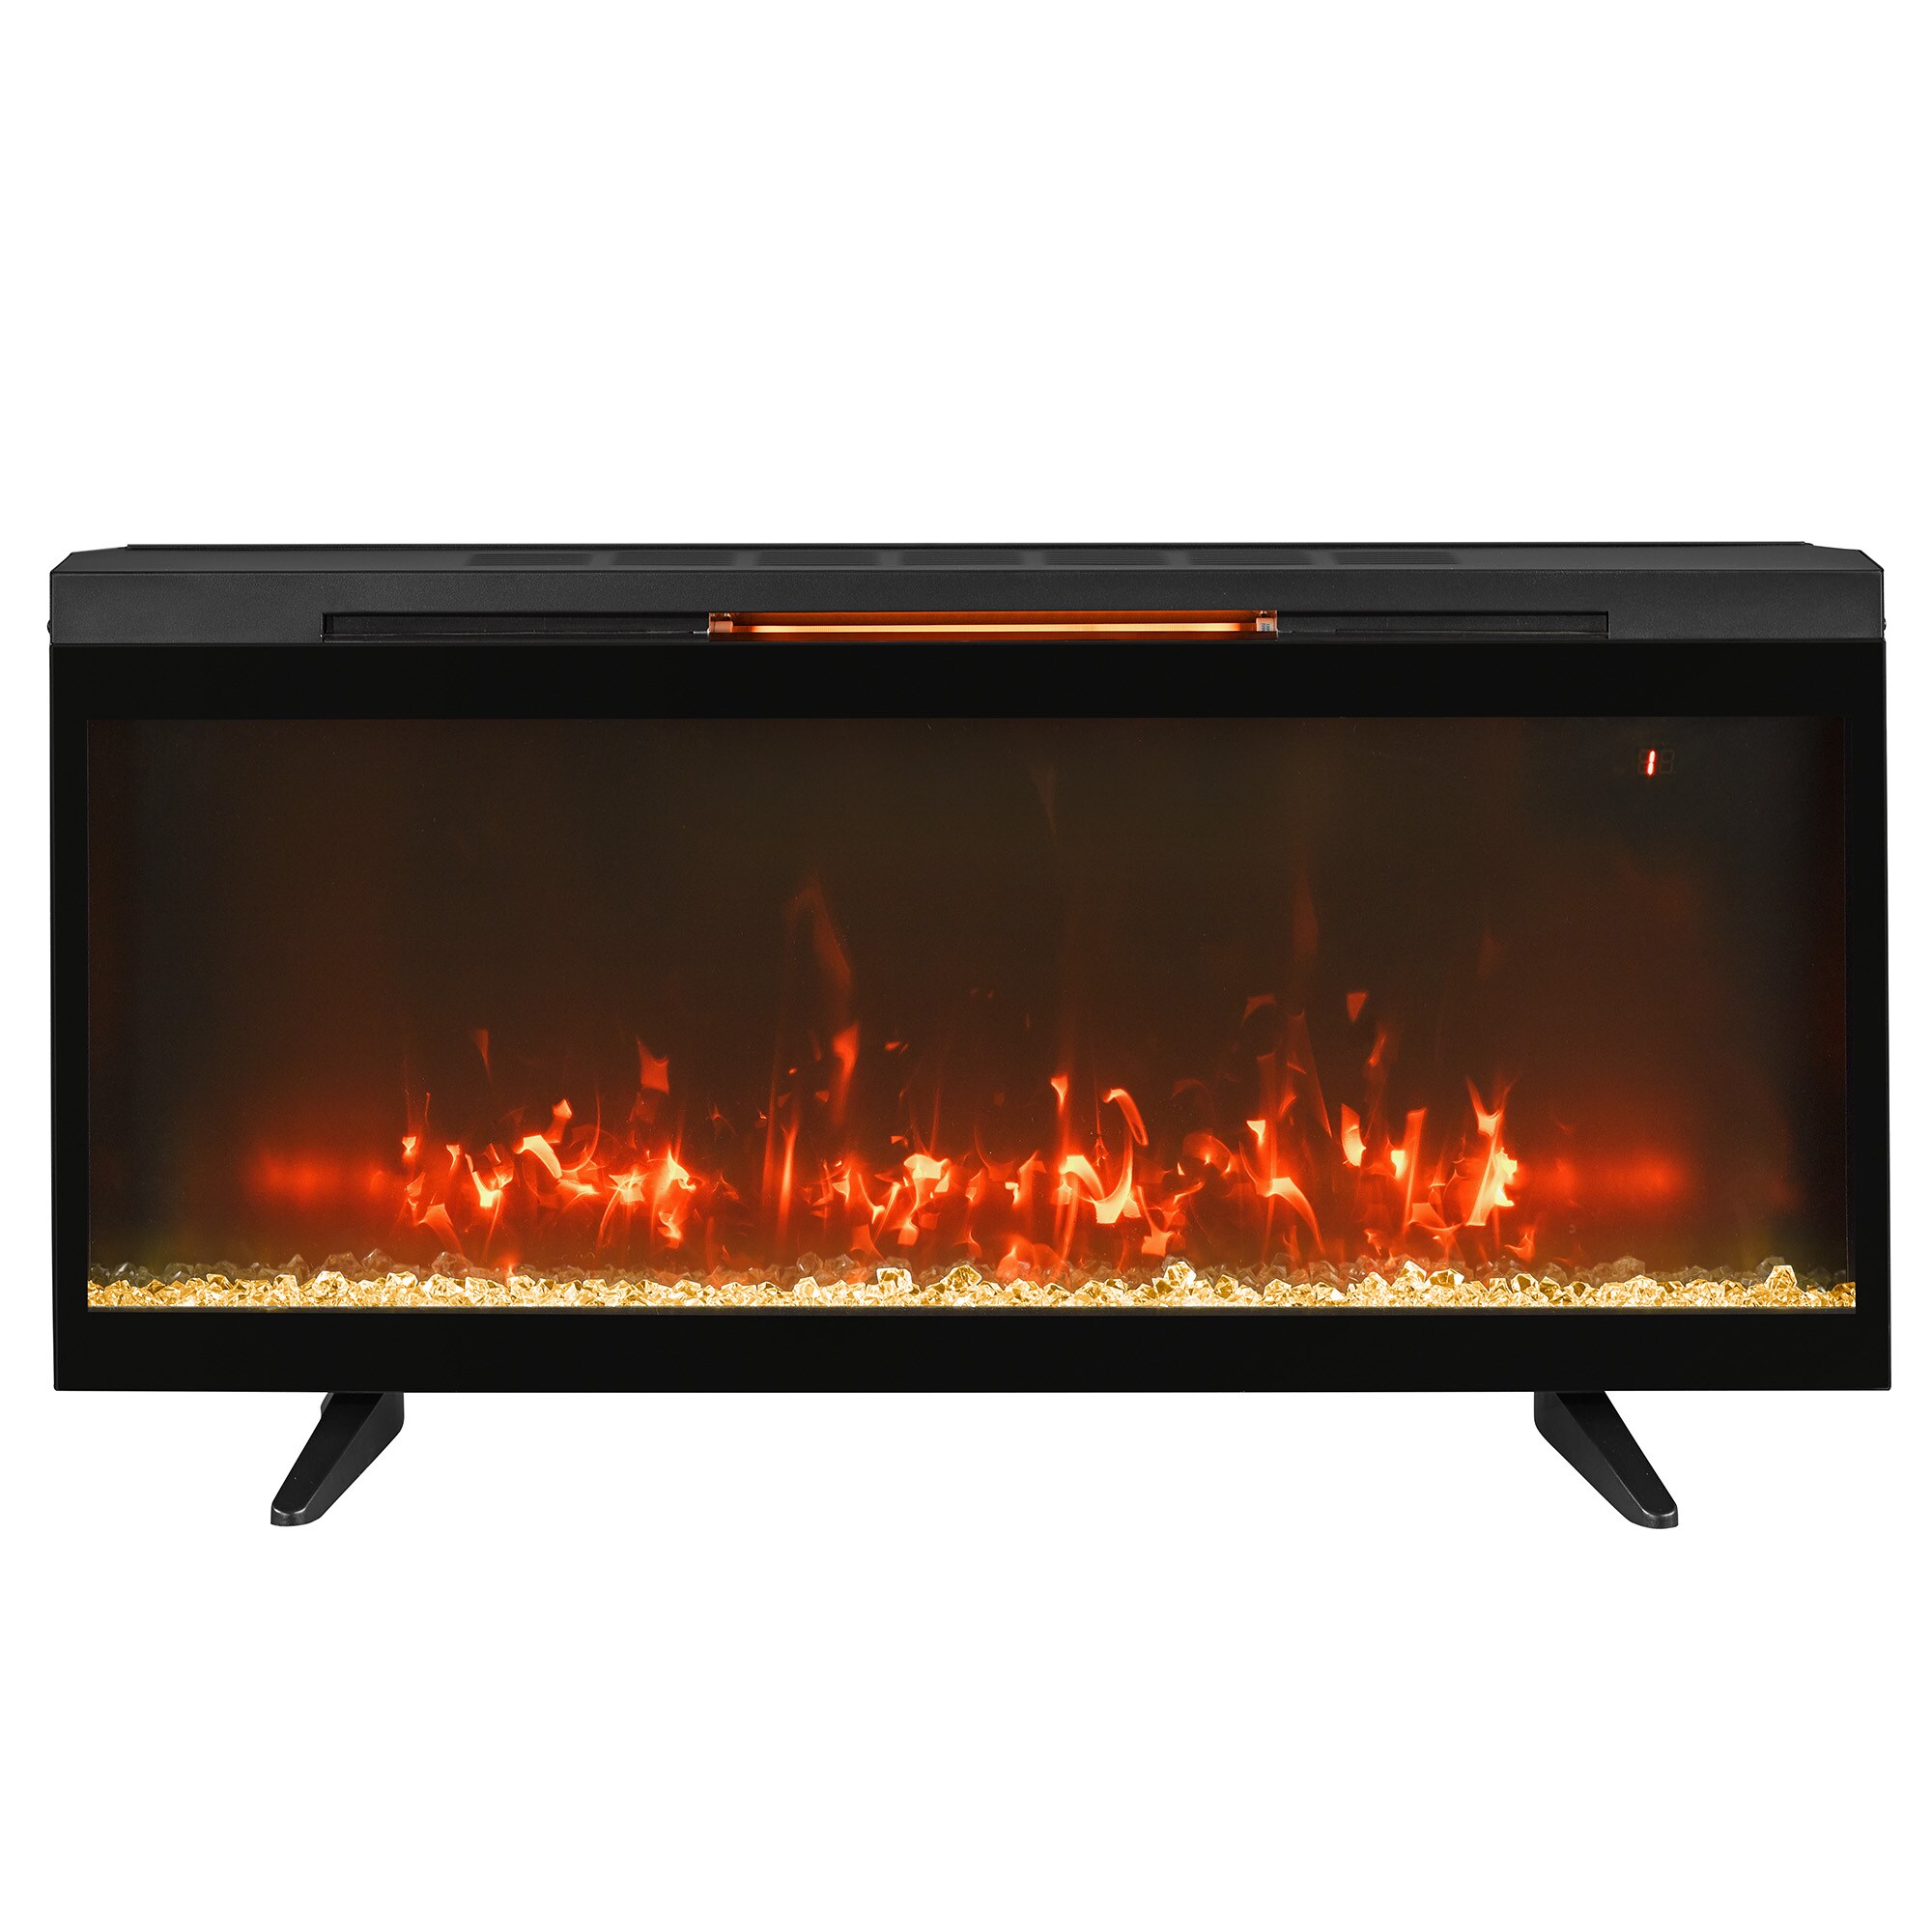 Lifesmart HW93233SMQR 42 Inch Infrared Wall Mount Electric Fireplace Black 